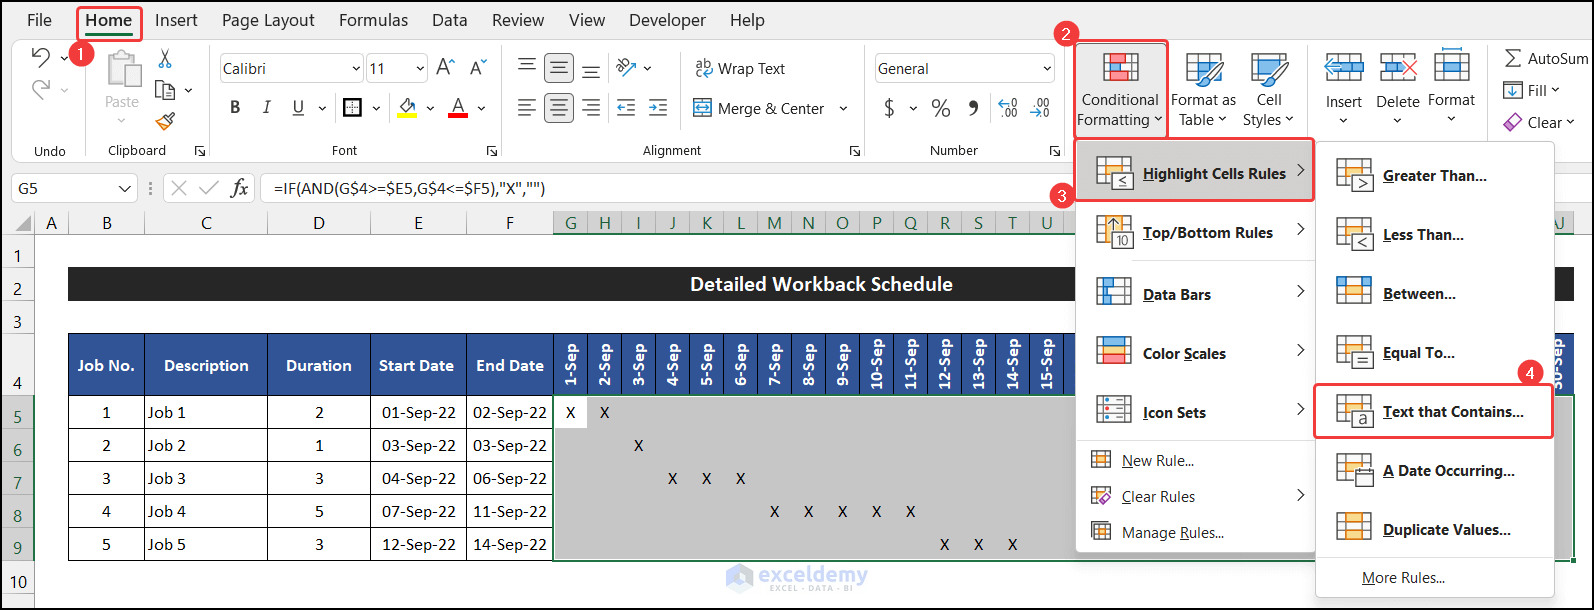 Applying conditional formatting to get the desired cell color in the workback schedule report